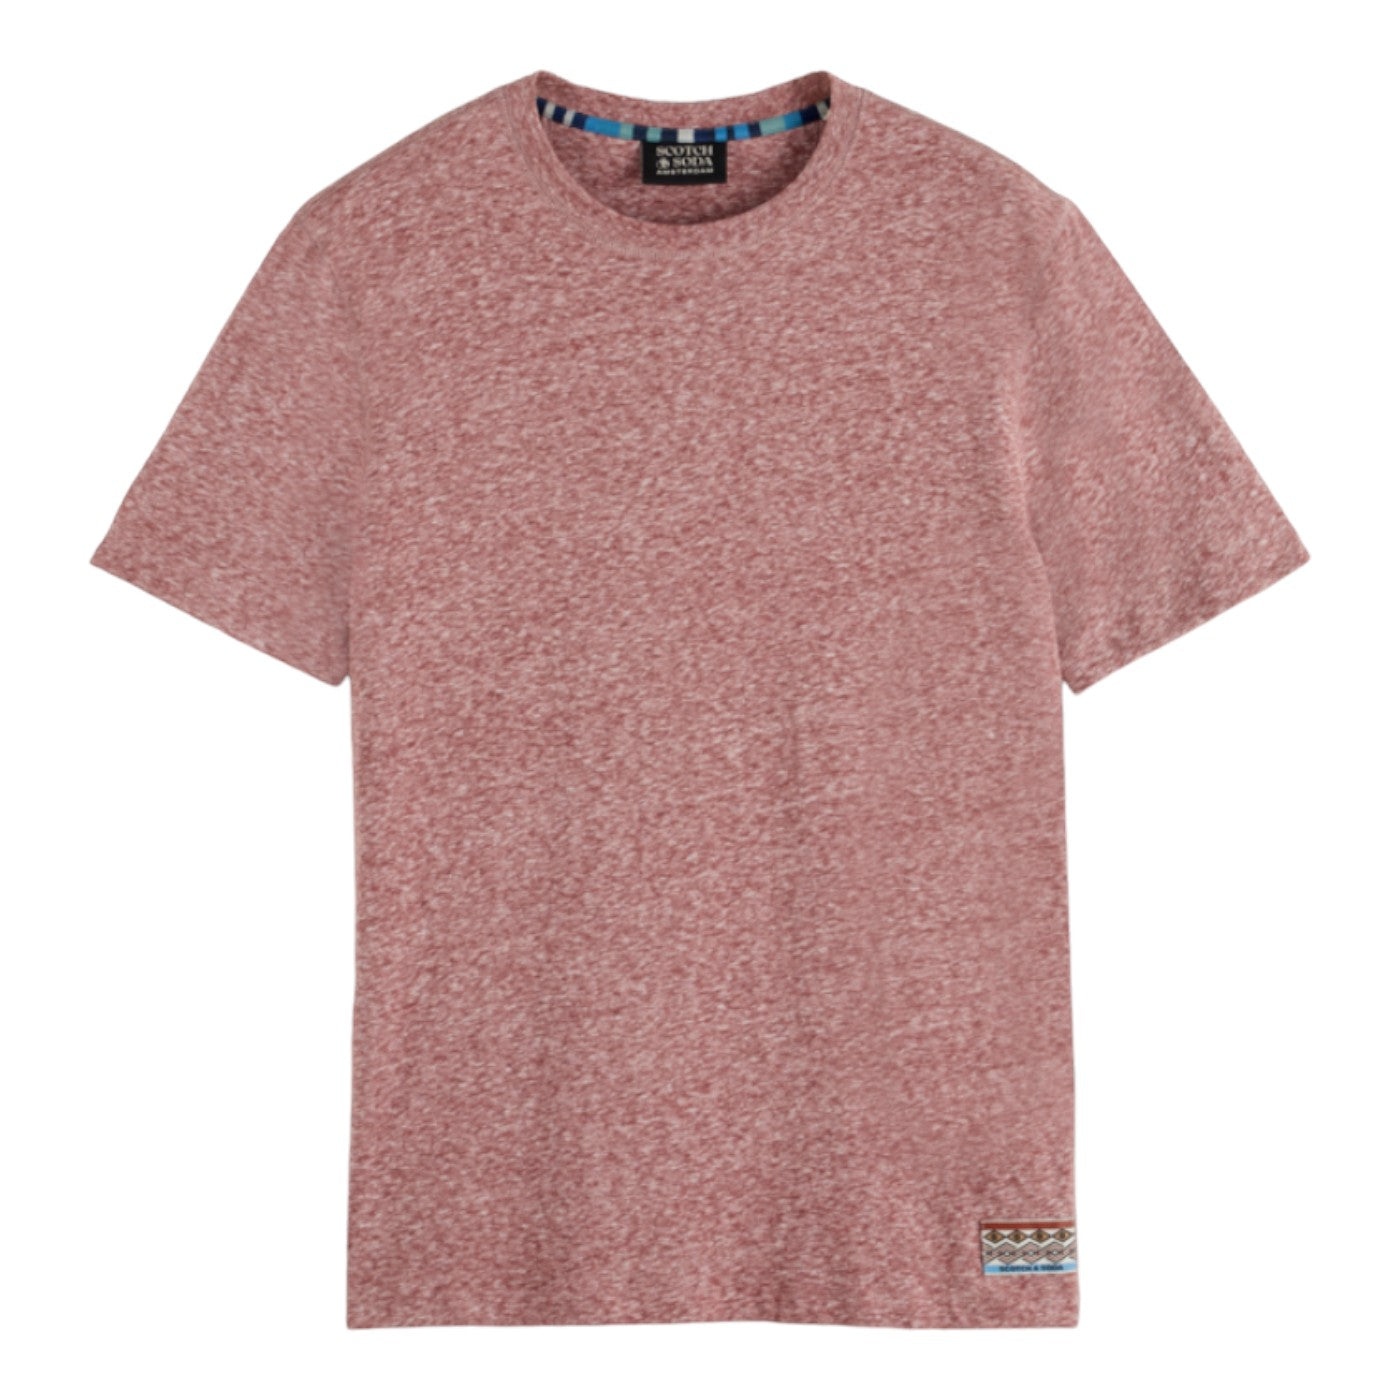 Pale red fitted tee shirt